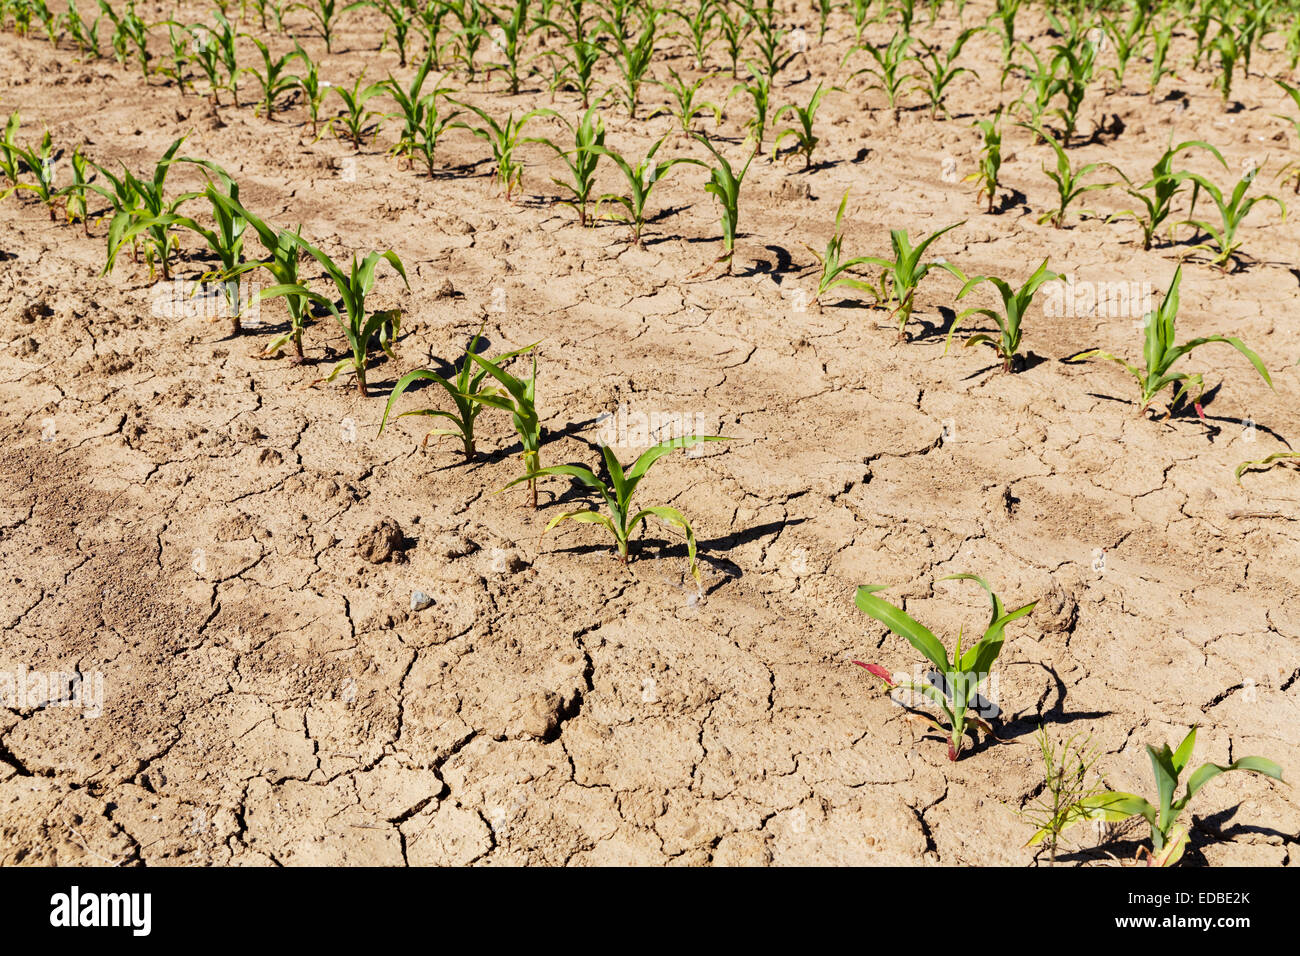 Corn field or maize field with mud cracks or drying cracks, Burgenland, Austria Stock Photo